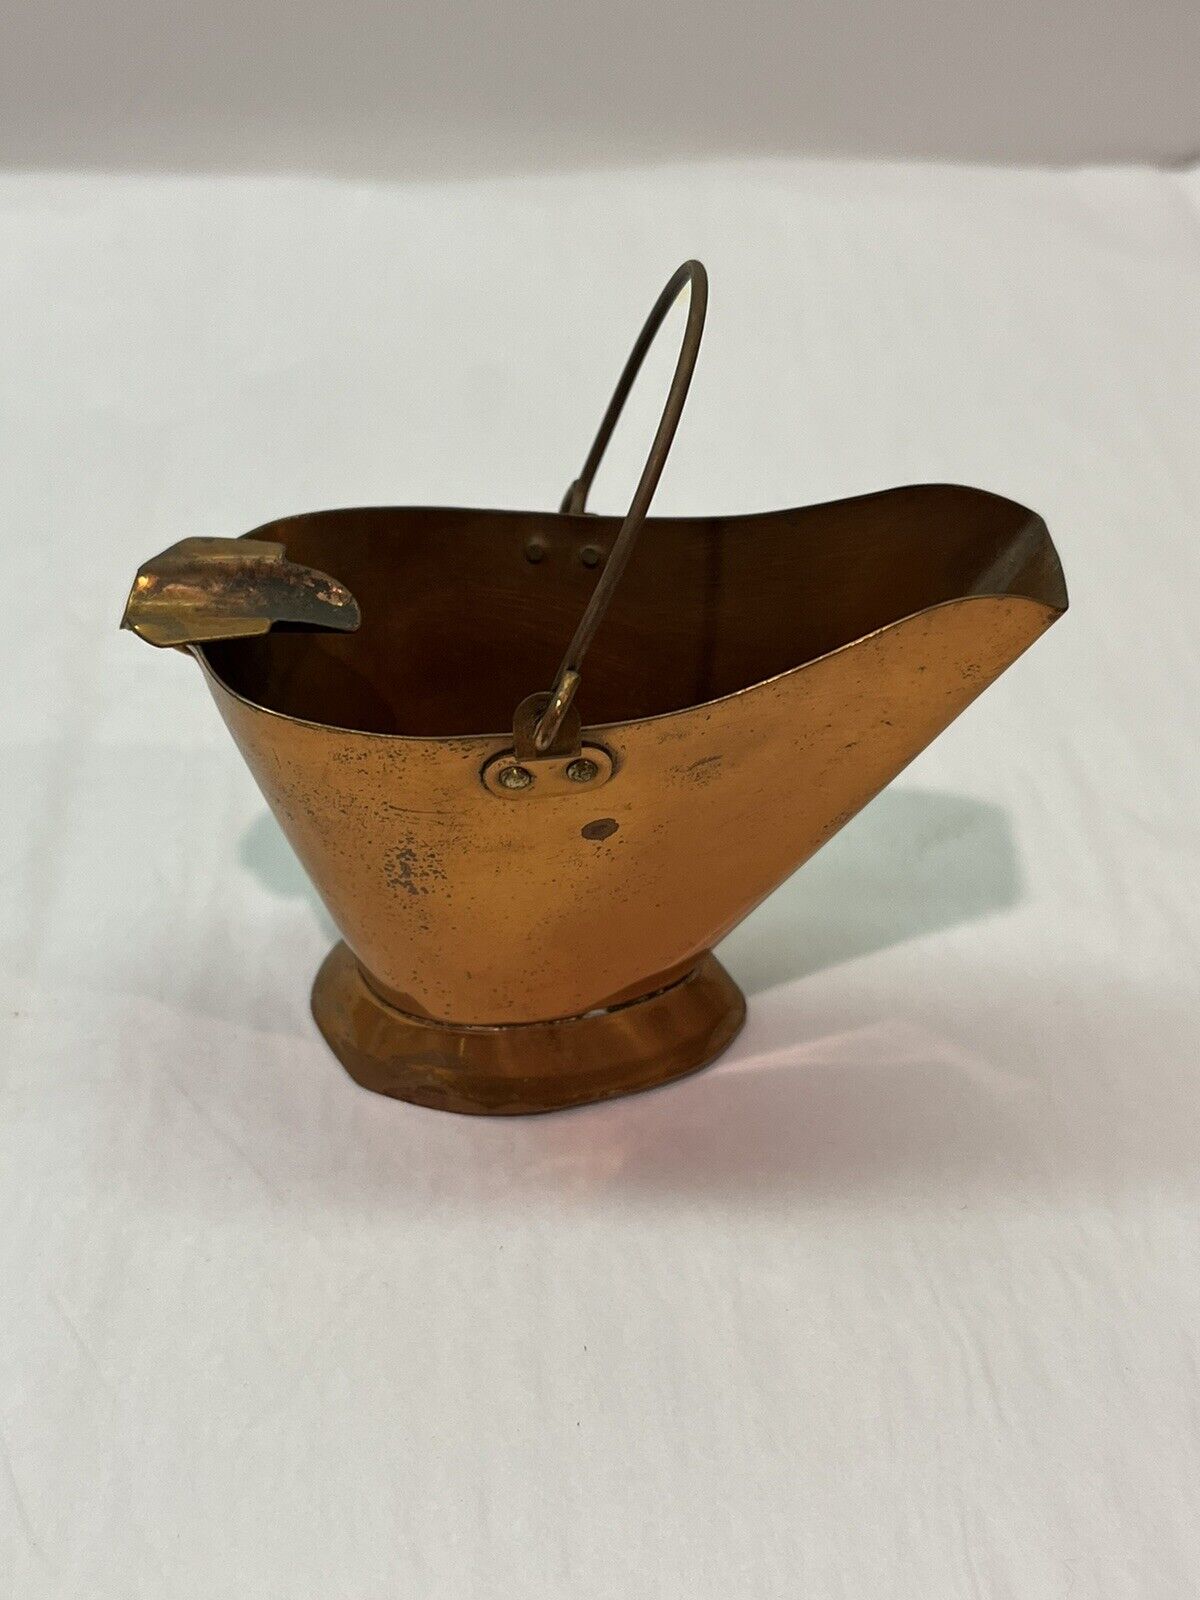 Vintage Copper Ashtray Pail Bucket Pitcher With Handle Rustic